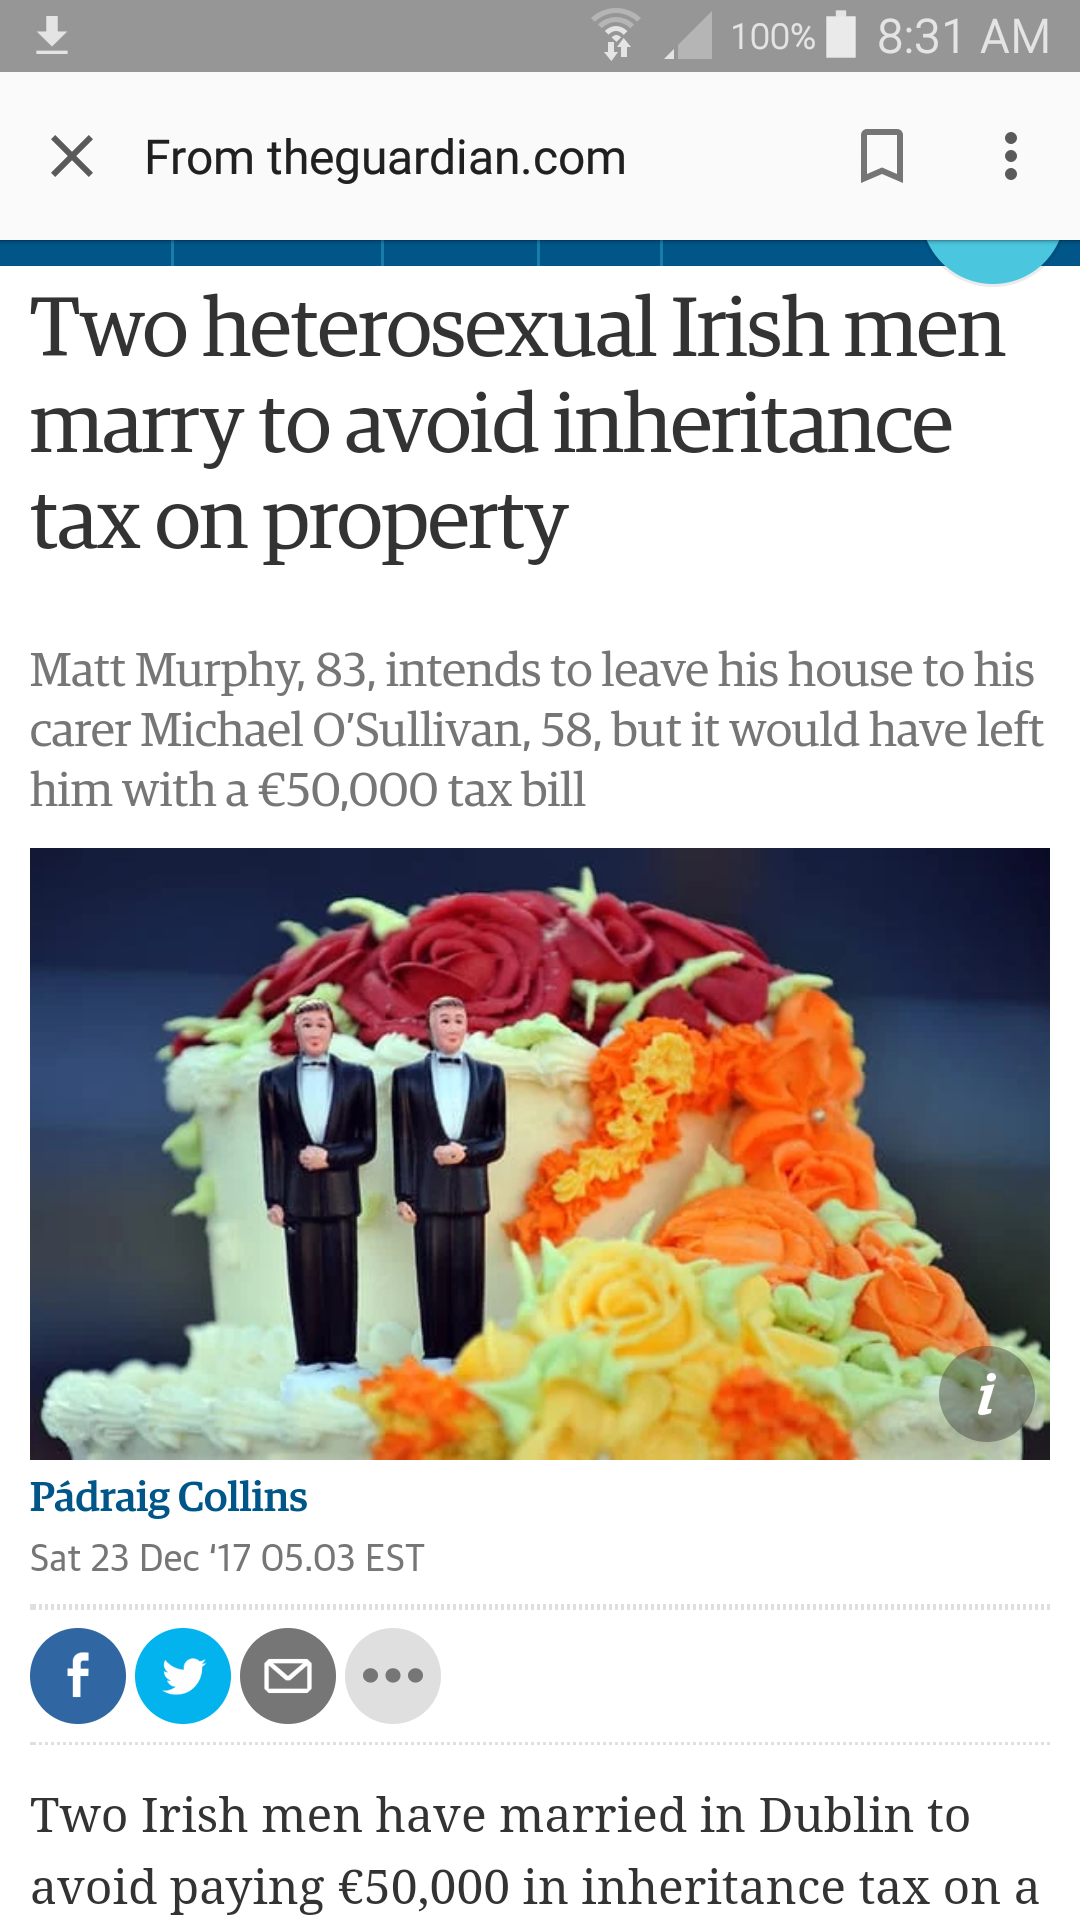 media - 100% X From theguardian.com Two heterosexual Irish men marry to avoid inheritance tax on property Matt Murphy, 83, intends to leave his house to his carer Michael O'Sullivan, 58, but it would have left him with a 50,000 tax bill Pdraig Collins Sat